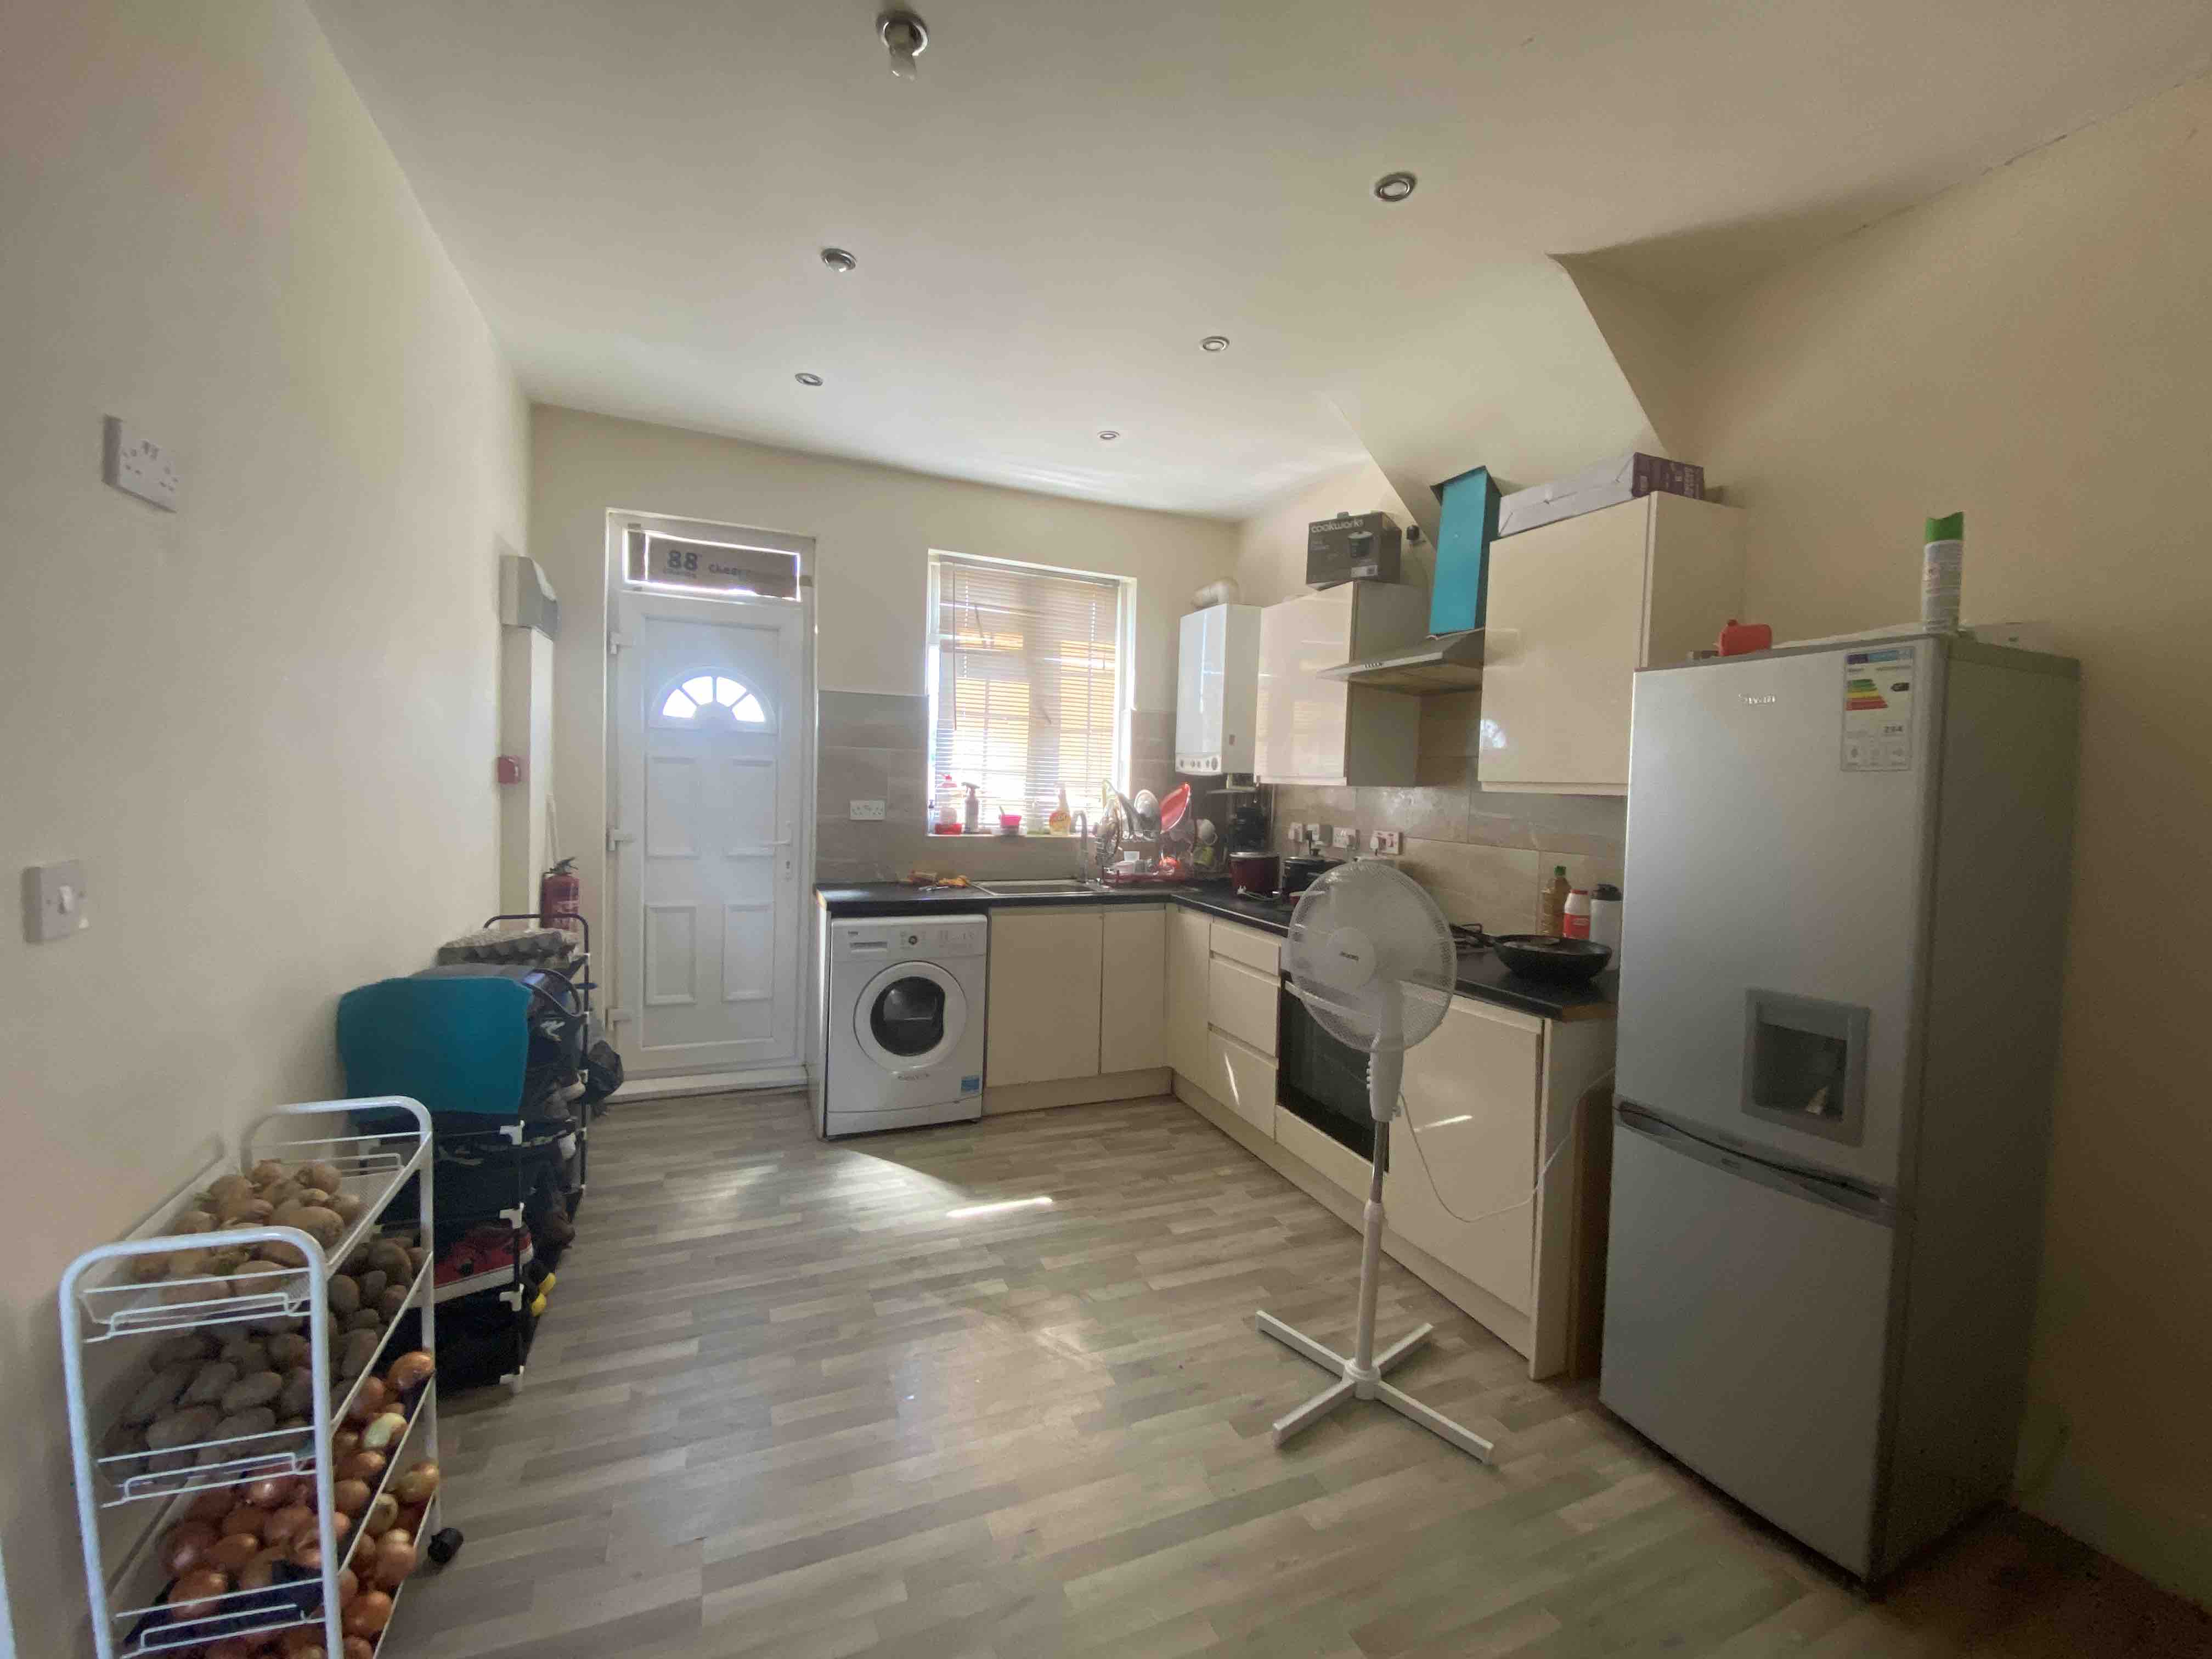 2 bedrooms available in 3 bedroom apartment RoomsLocal image